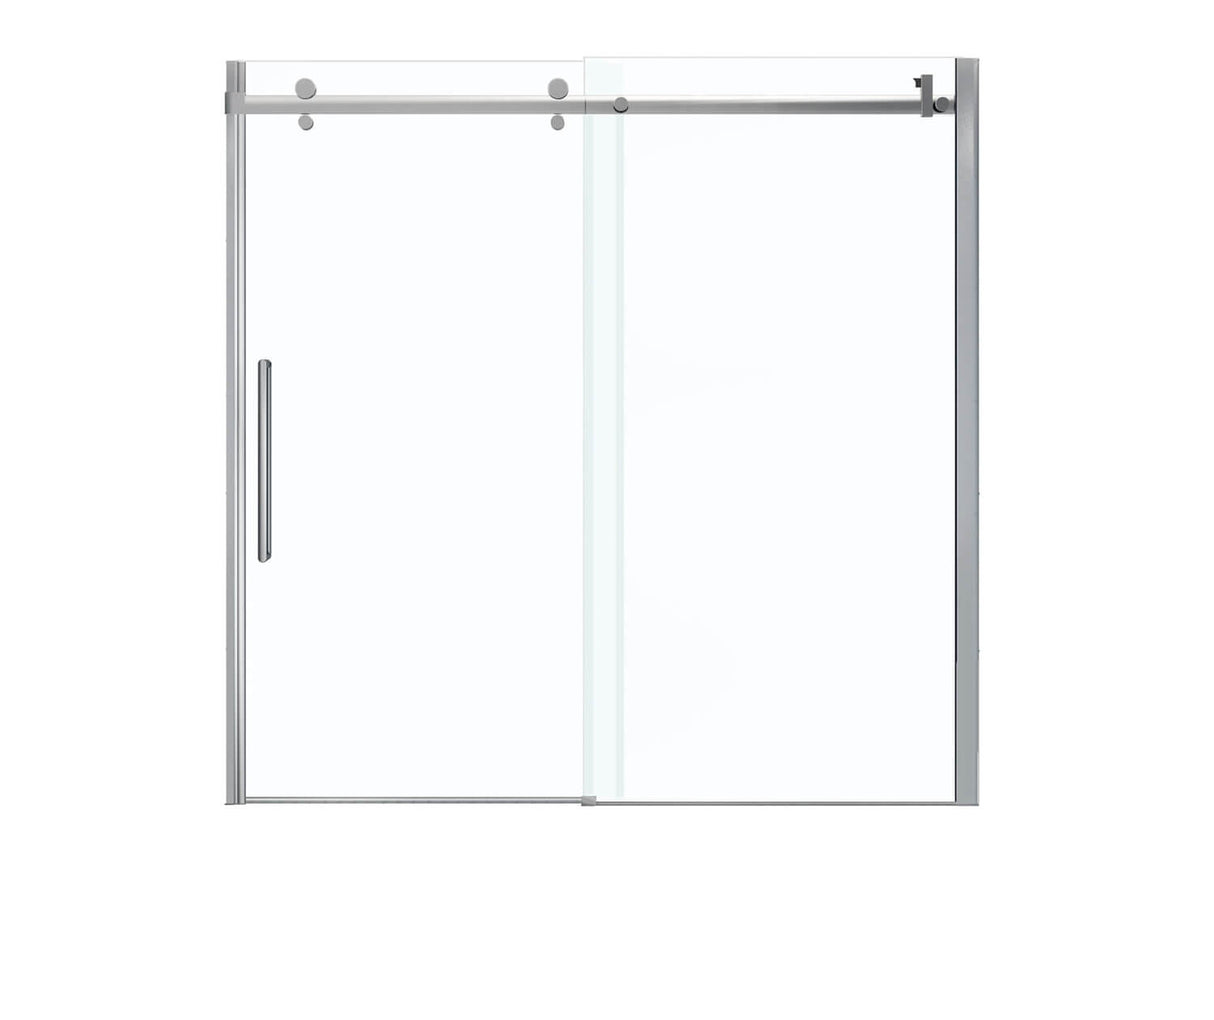 MAAX 139398-900-084-000 Halo 56 ½-59 x 59 in. 8 mm Sliding Tub Door for Alcove Installation with Clear glass in Chrome